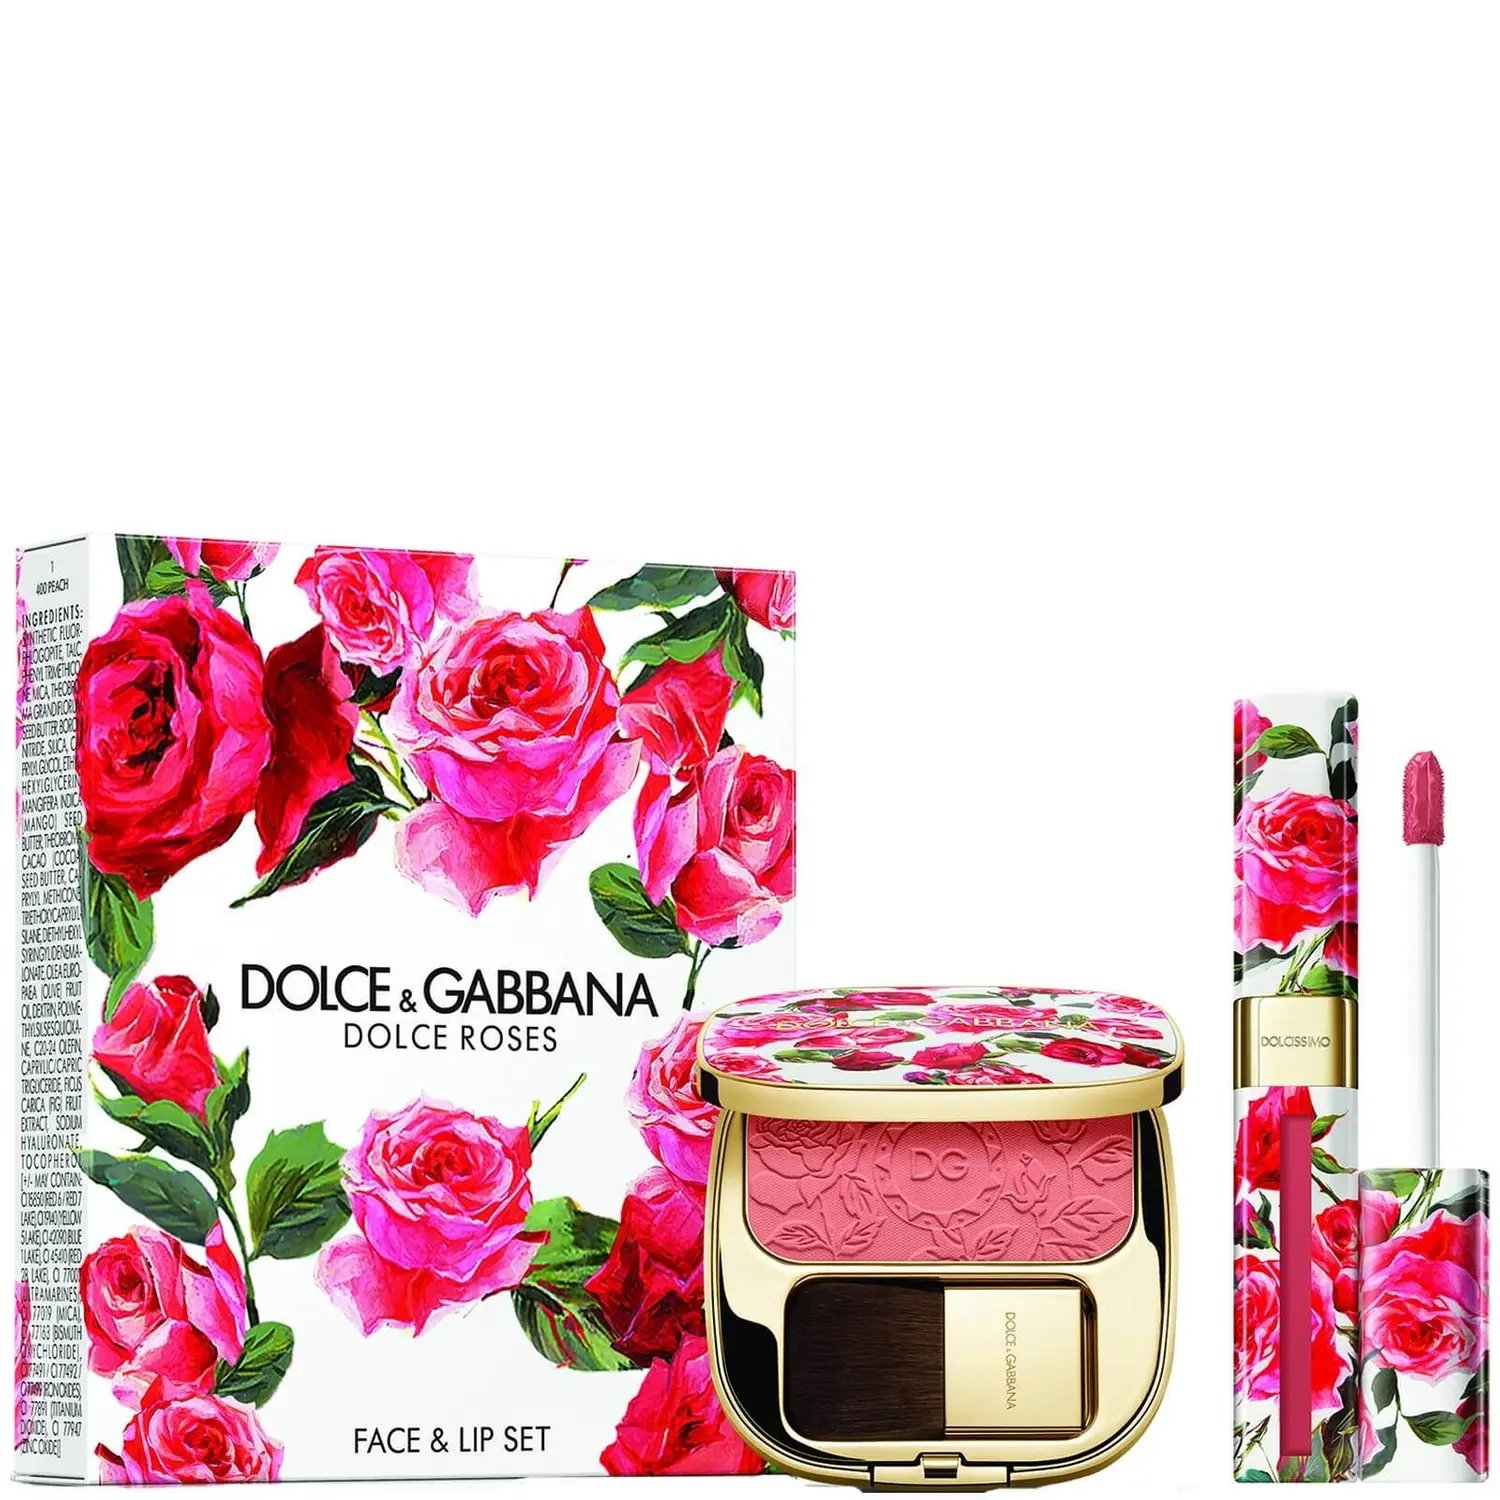  19.DOLCE &amp; GABBANA Exclusive Dolce Roses Face and Lip Set €85,